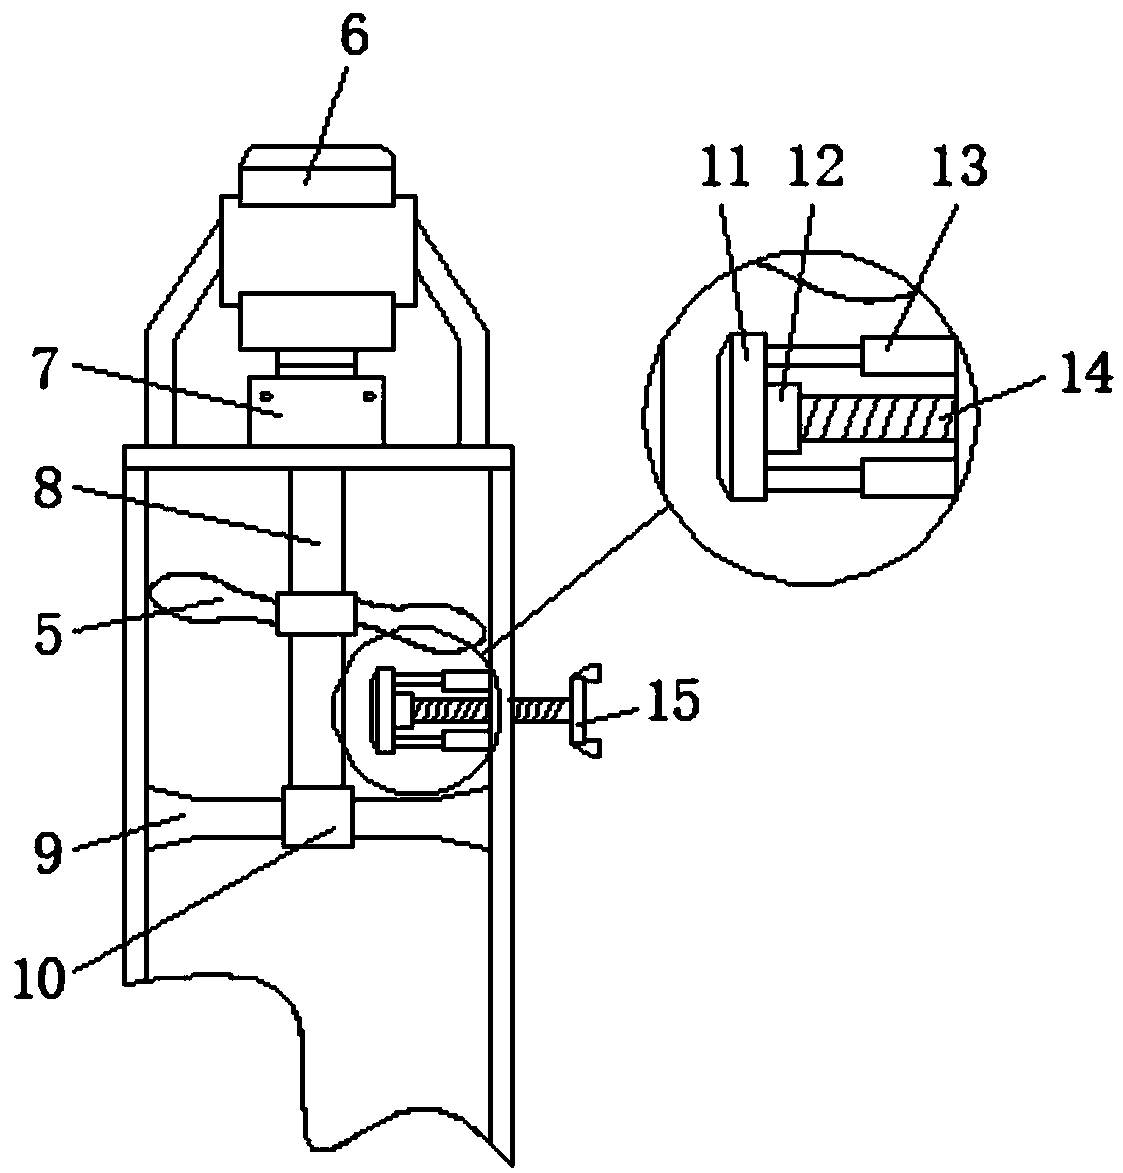 Vocal-assisted breath practice device